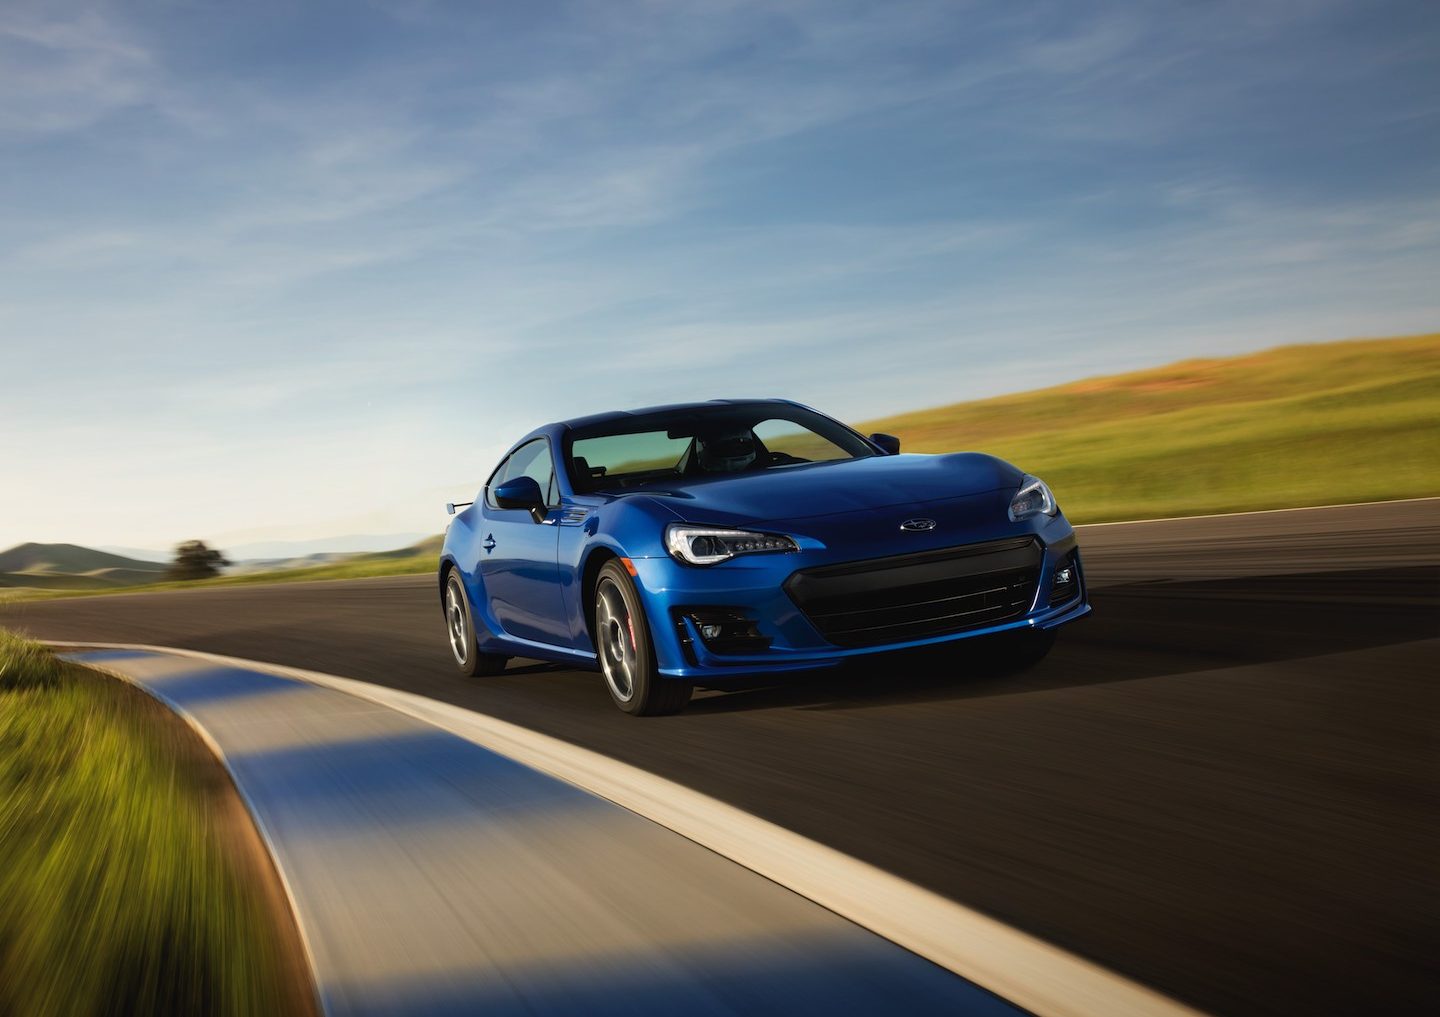 The 12 Subaru BRZ Should Arrive This Fall With Big Upgrades